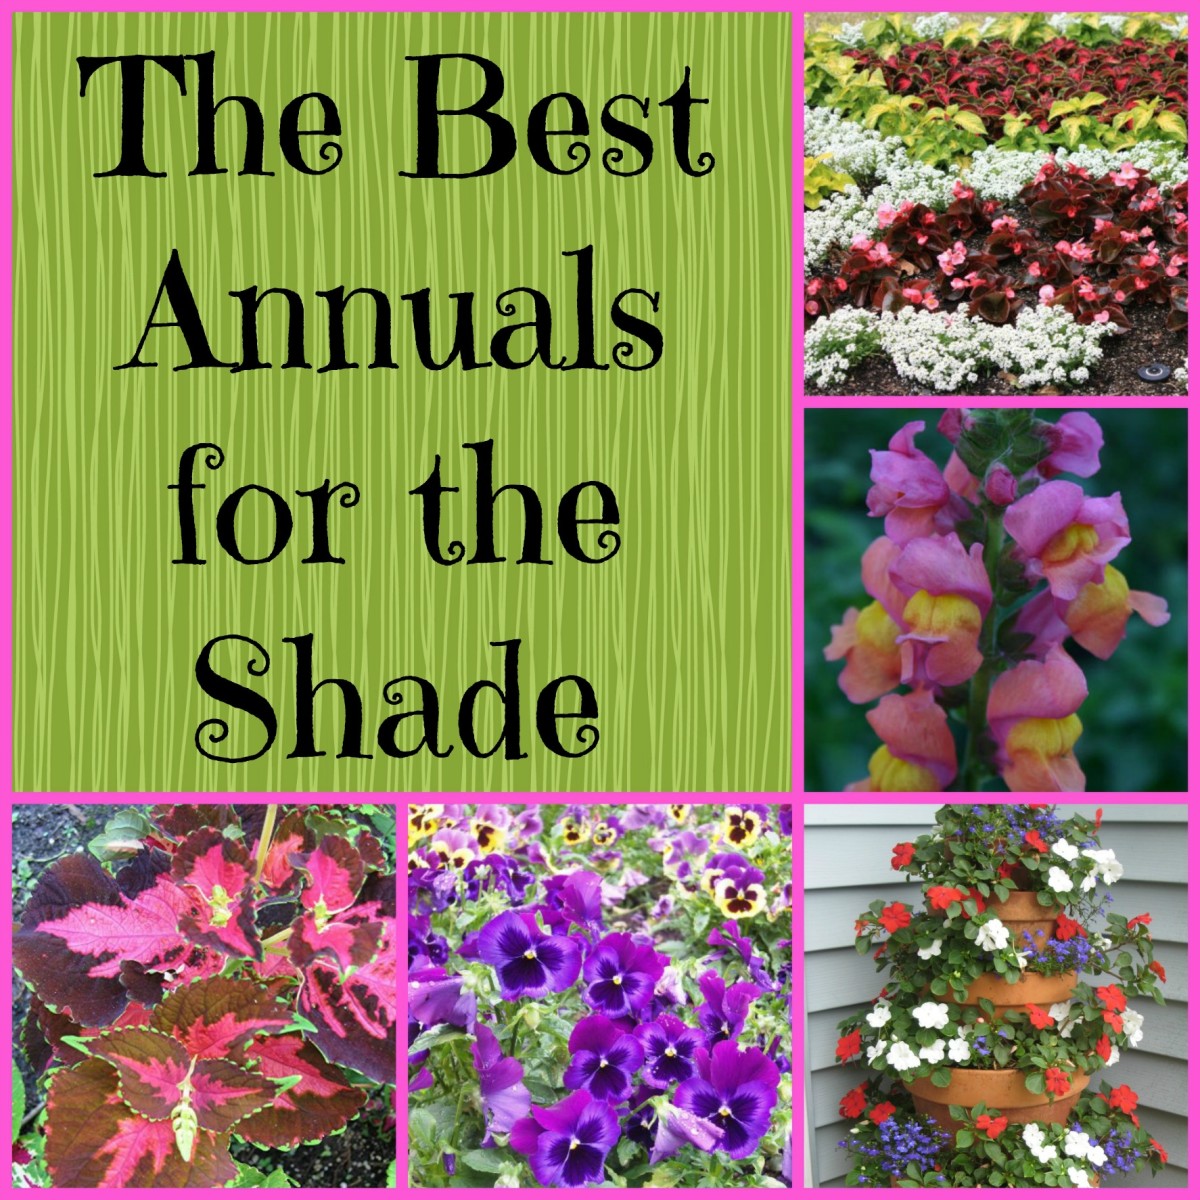 gardening in the shade: 9 annual plants for shady areas | dengarden